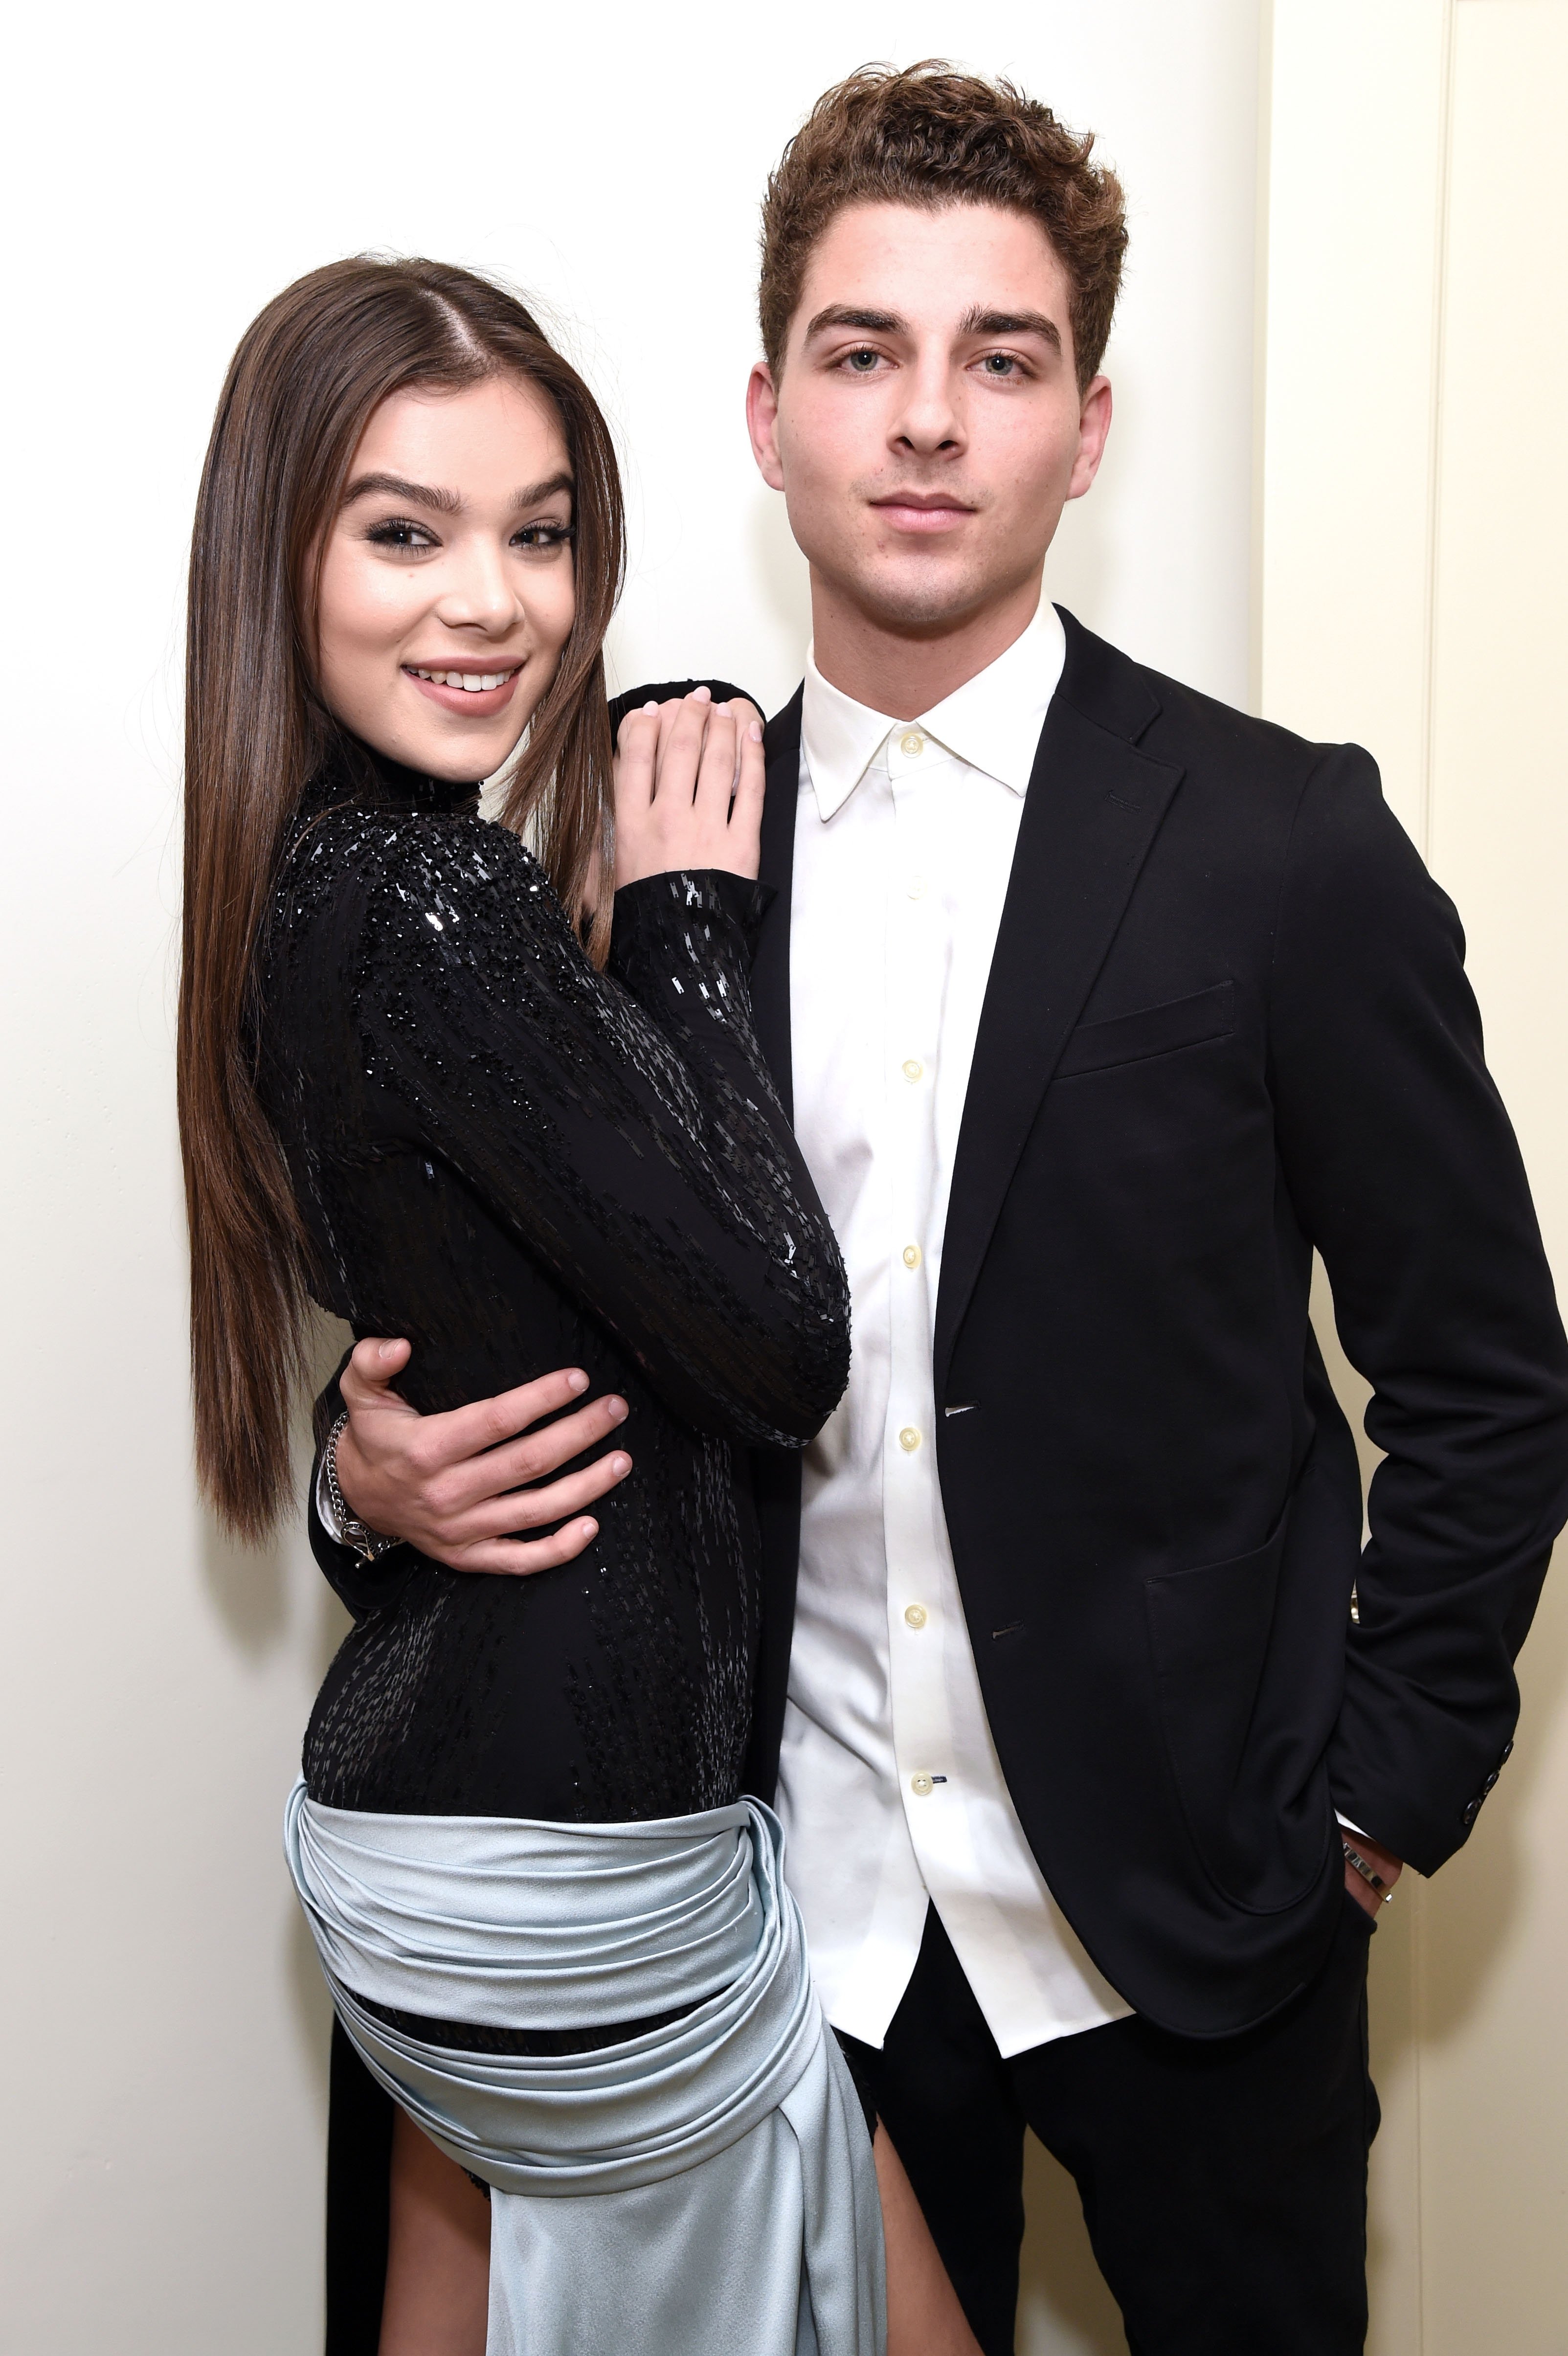 Actress Hailee Steinfeld and Cameron Smoller attend W Magazine Celebrates the Best Performances Portfolio and the Golden Globes at Chateau Marmont on January 5, 2017 in Los Angeles, California. | Source: Getty Images